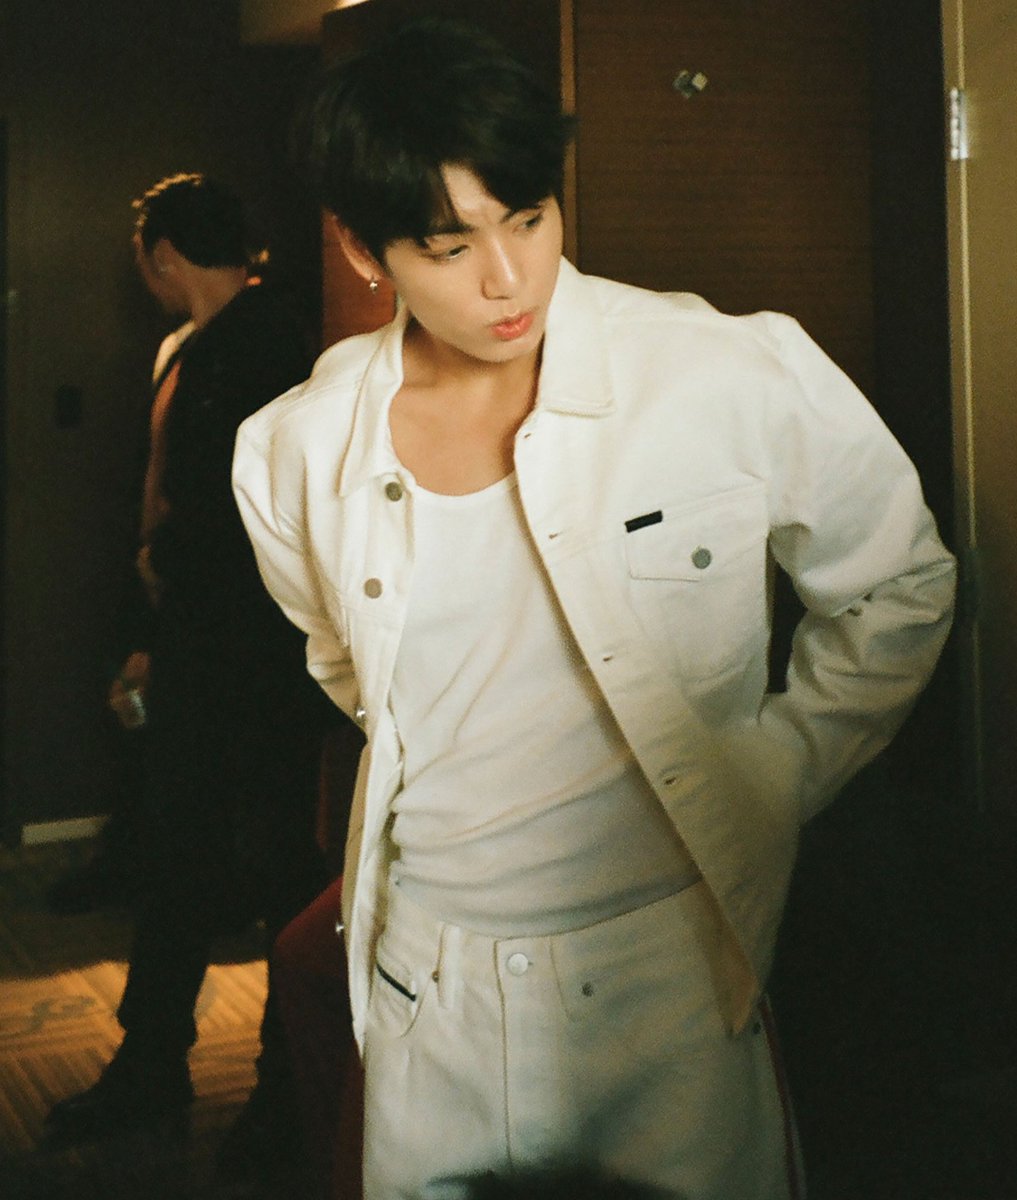 jungkook with his shirt tuck in; a thread